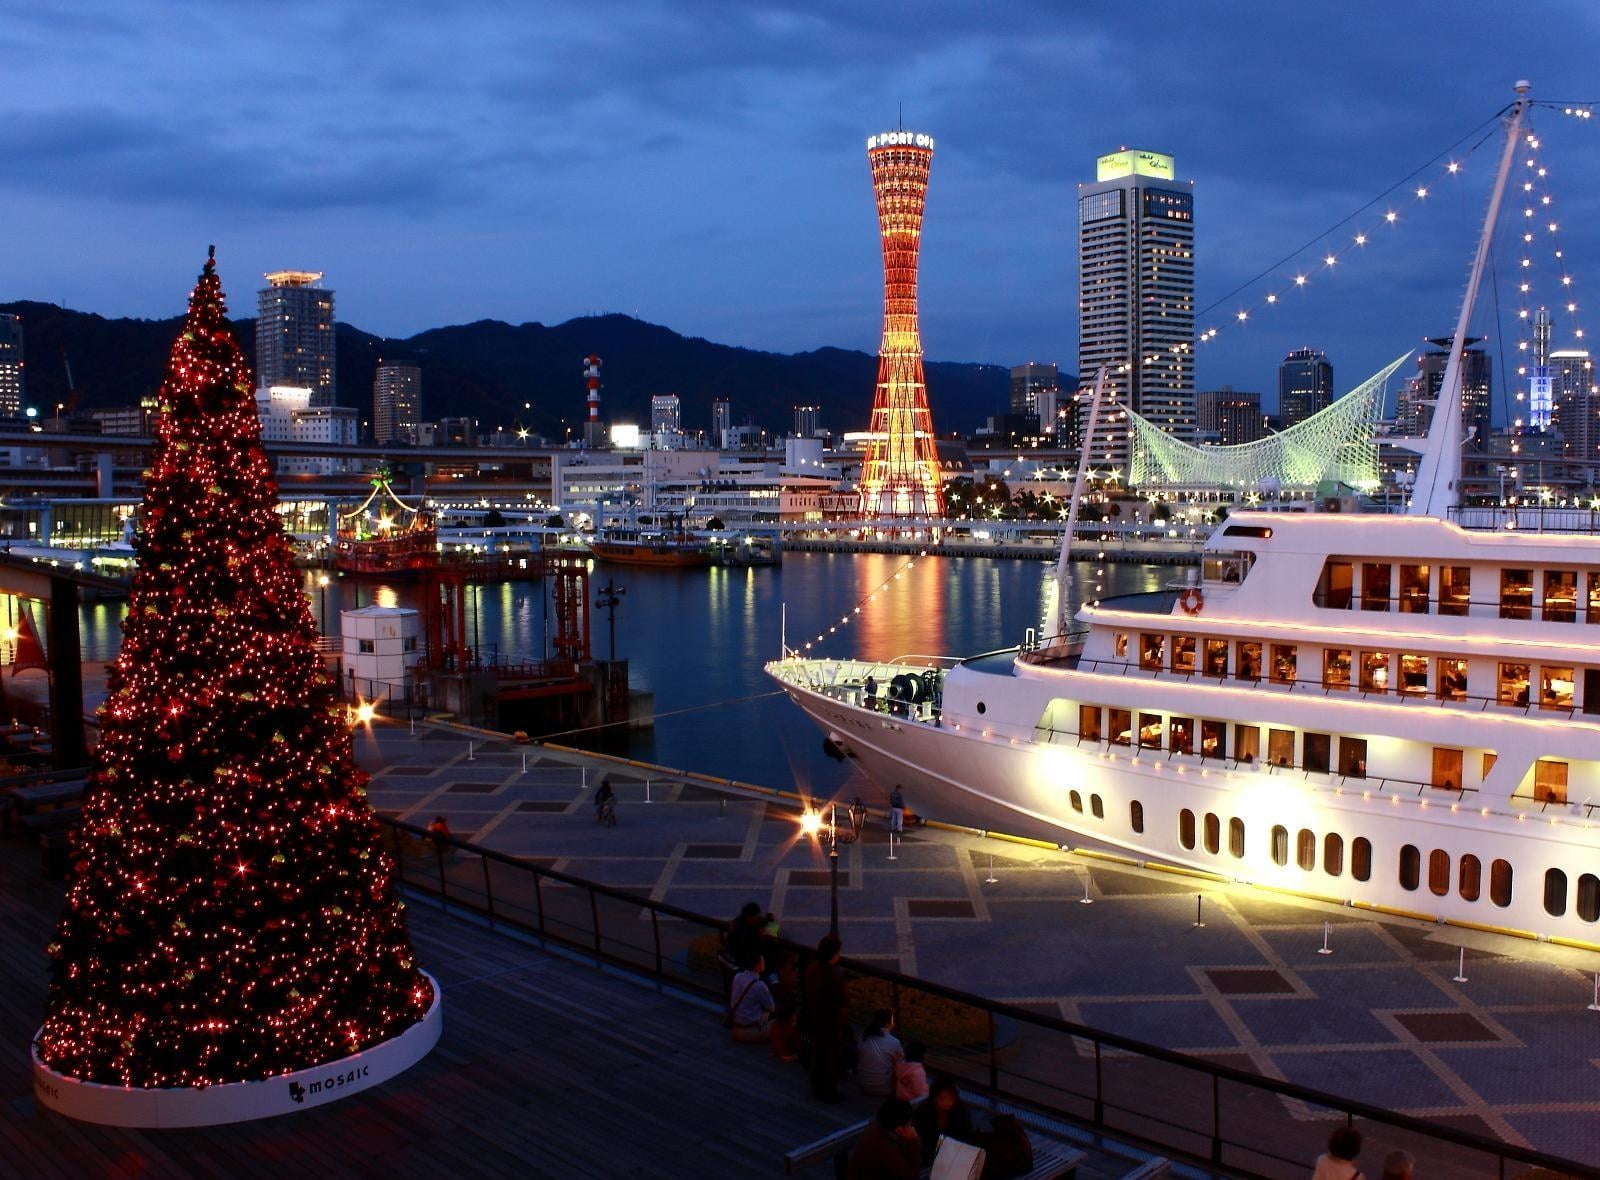 white cruise ship, tree, holiday, port, night, lights, famous Place